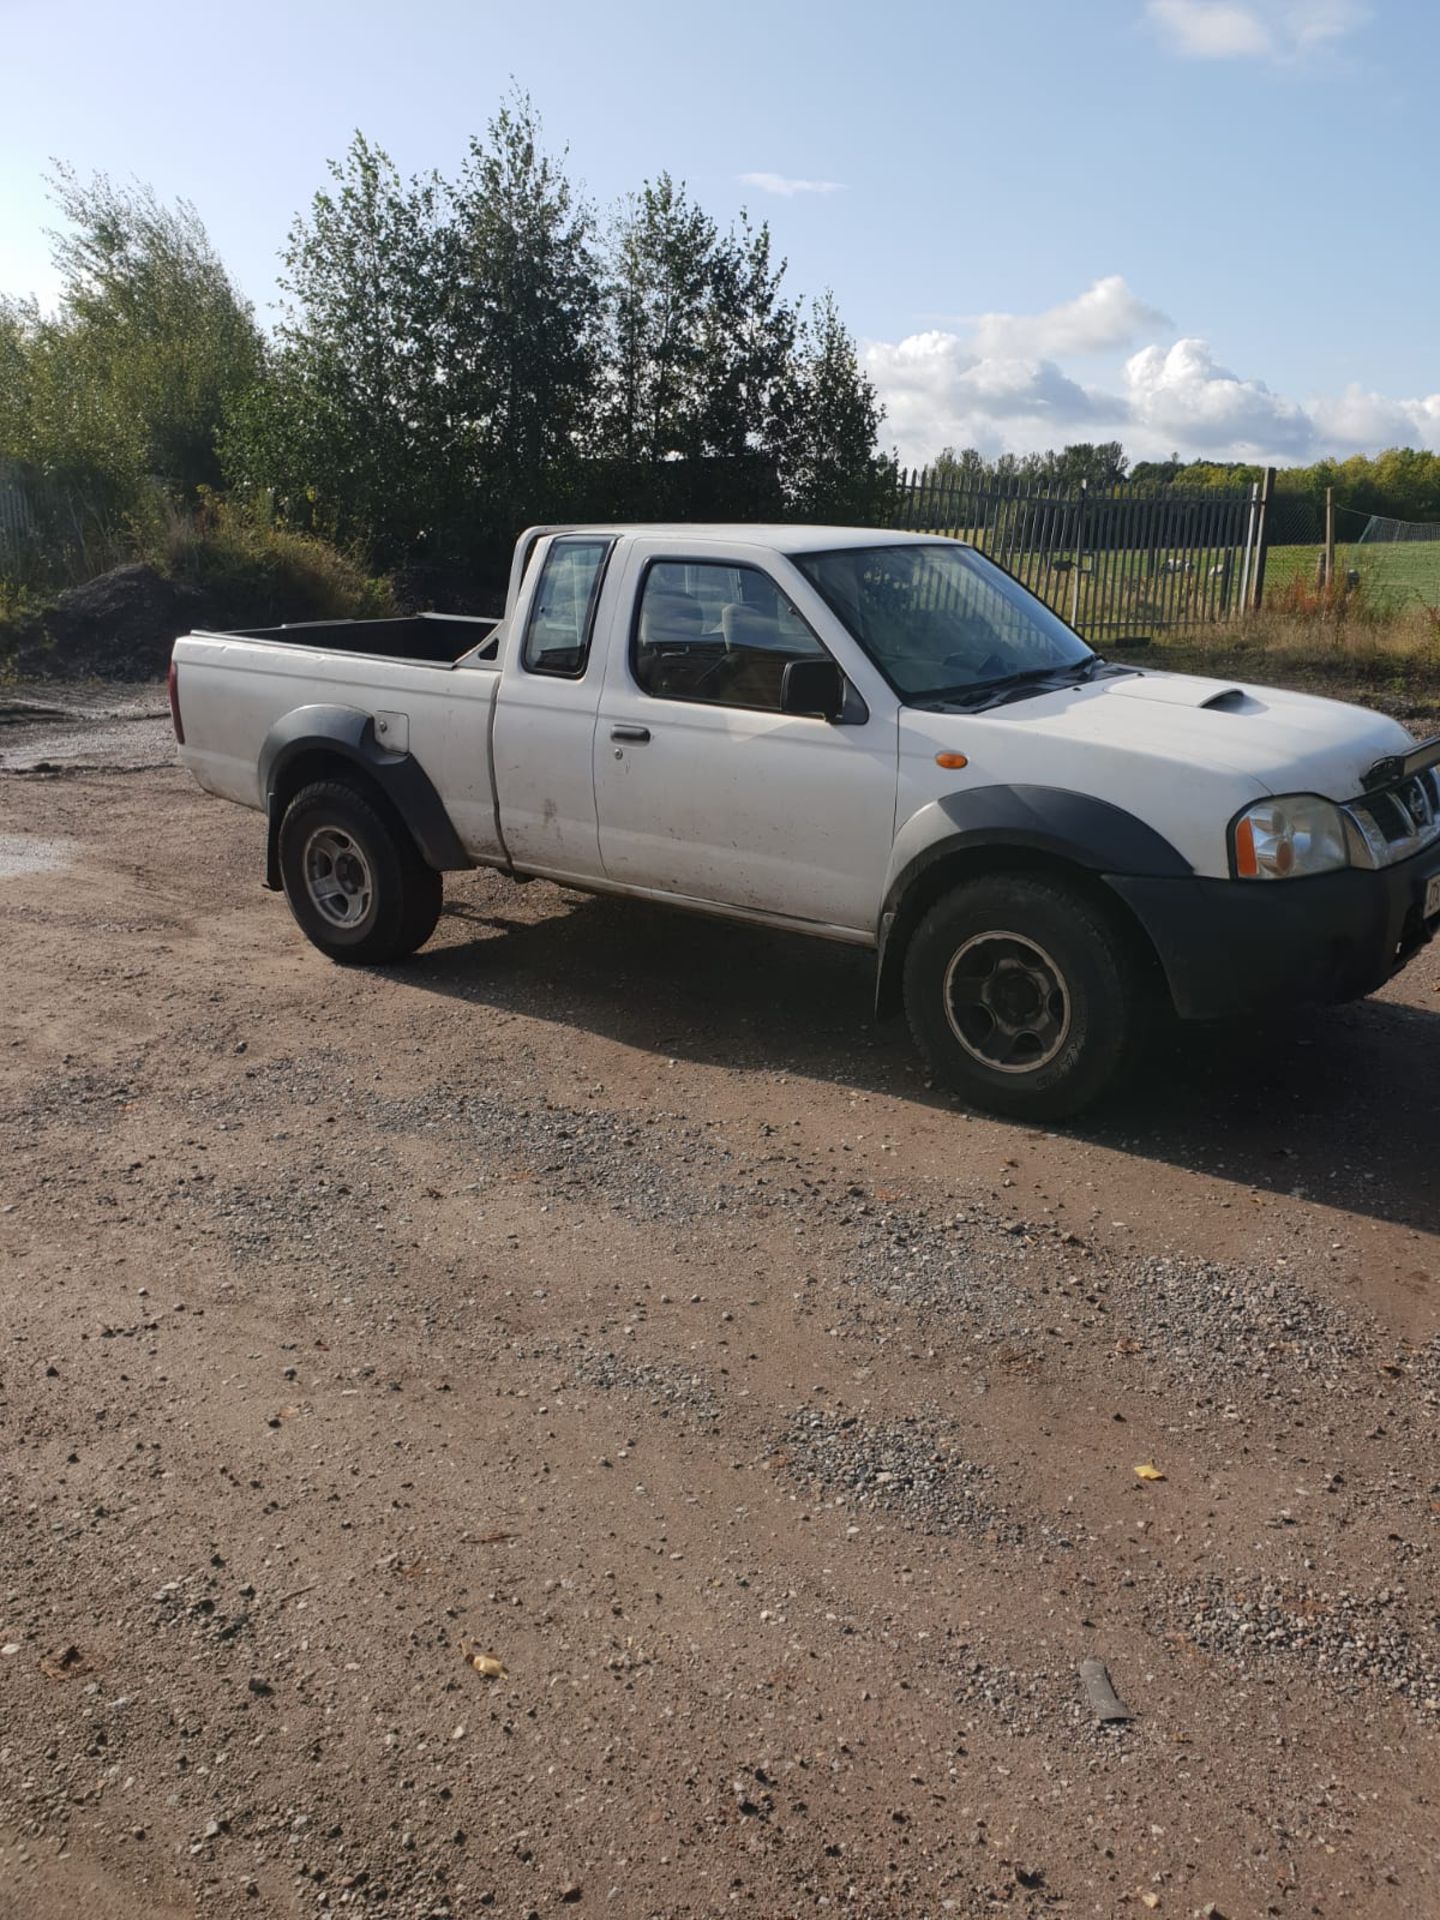 2003/53 REG NISSAN D22 2.5 DI 4X4 2.5 DIESEL WHITE PICK-UP, SHOWING 2 FORMER KEEPERS *NO VAT*